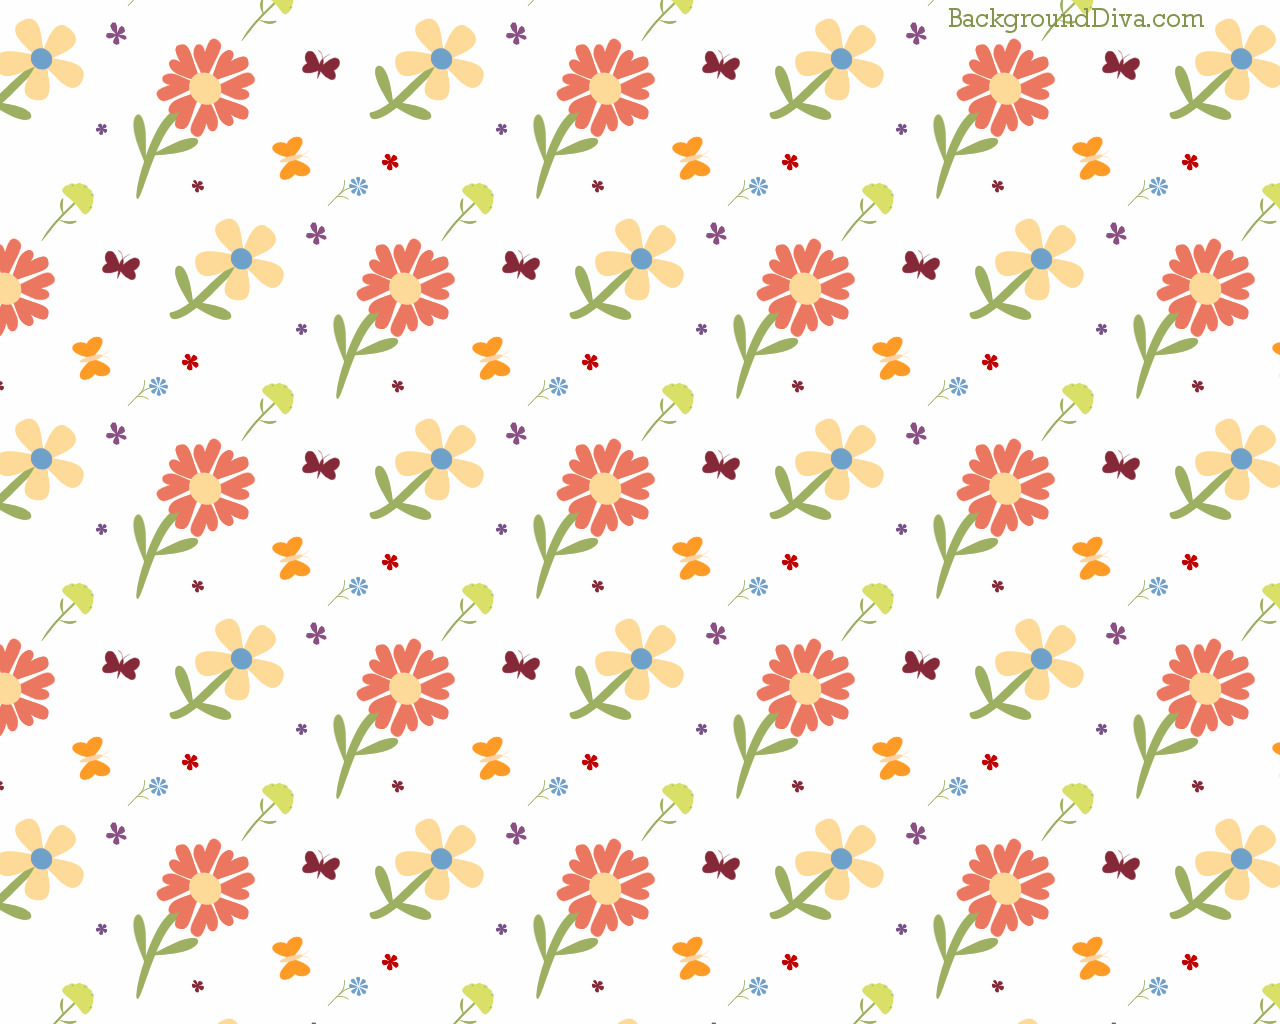 cute tumblr background patterns